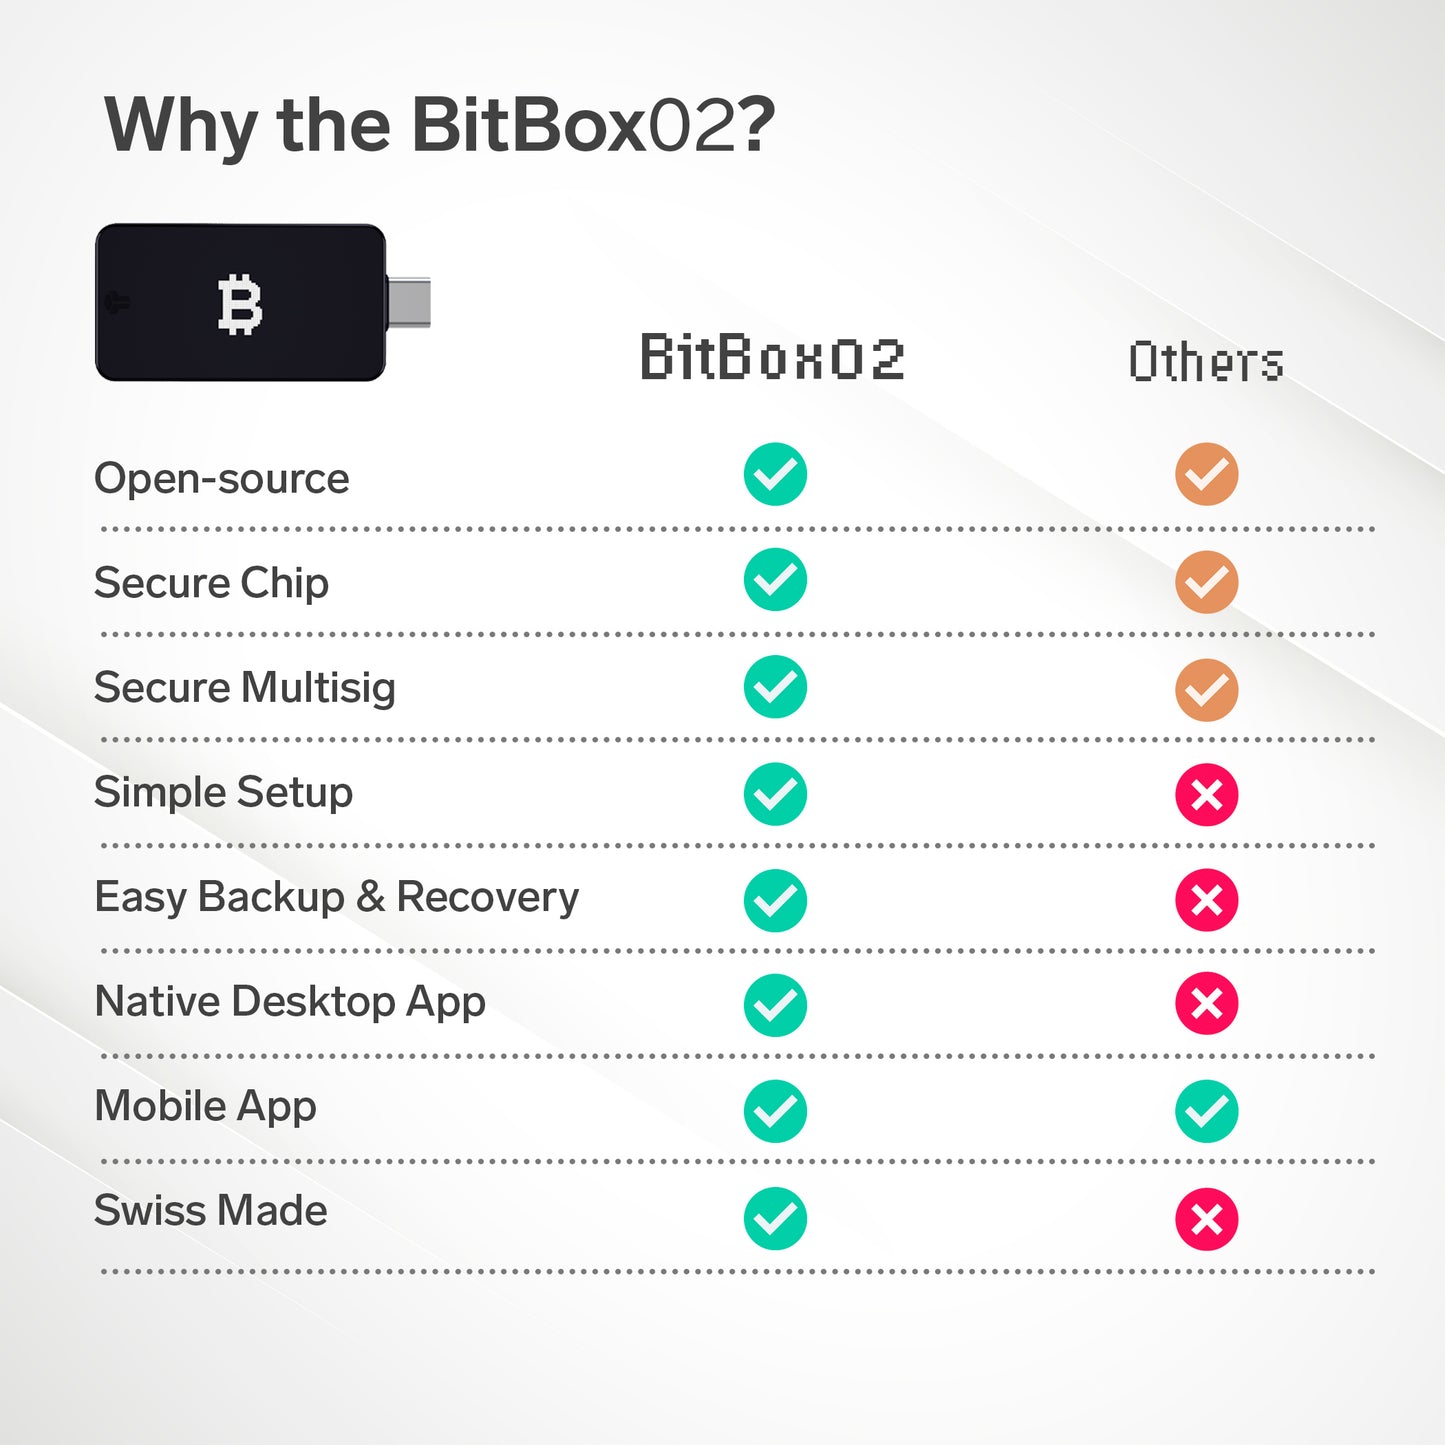 Bitbox02 (Bitcoin only edition)